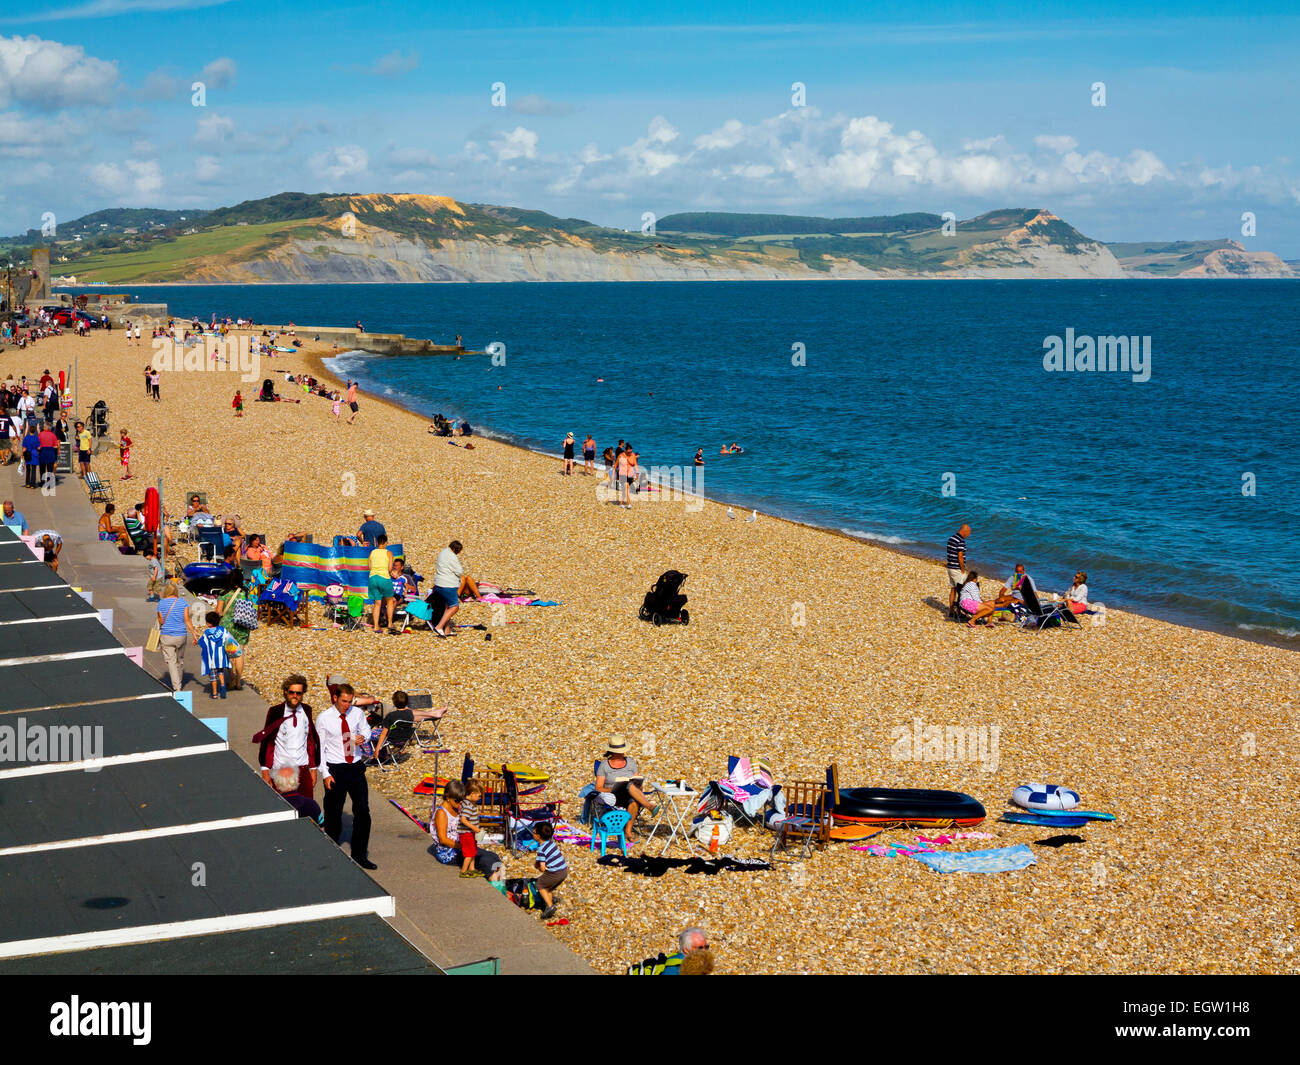 The beach at  Lyme Regis Dorset England UK with dramatic sandstone cliffs at Golden Cap and the Jurassic Coast visible beyond Stock Photo